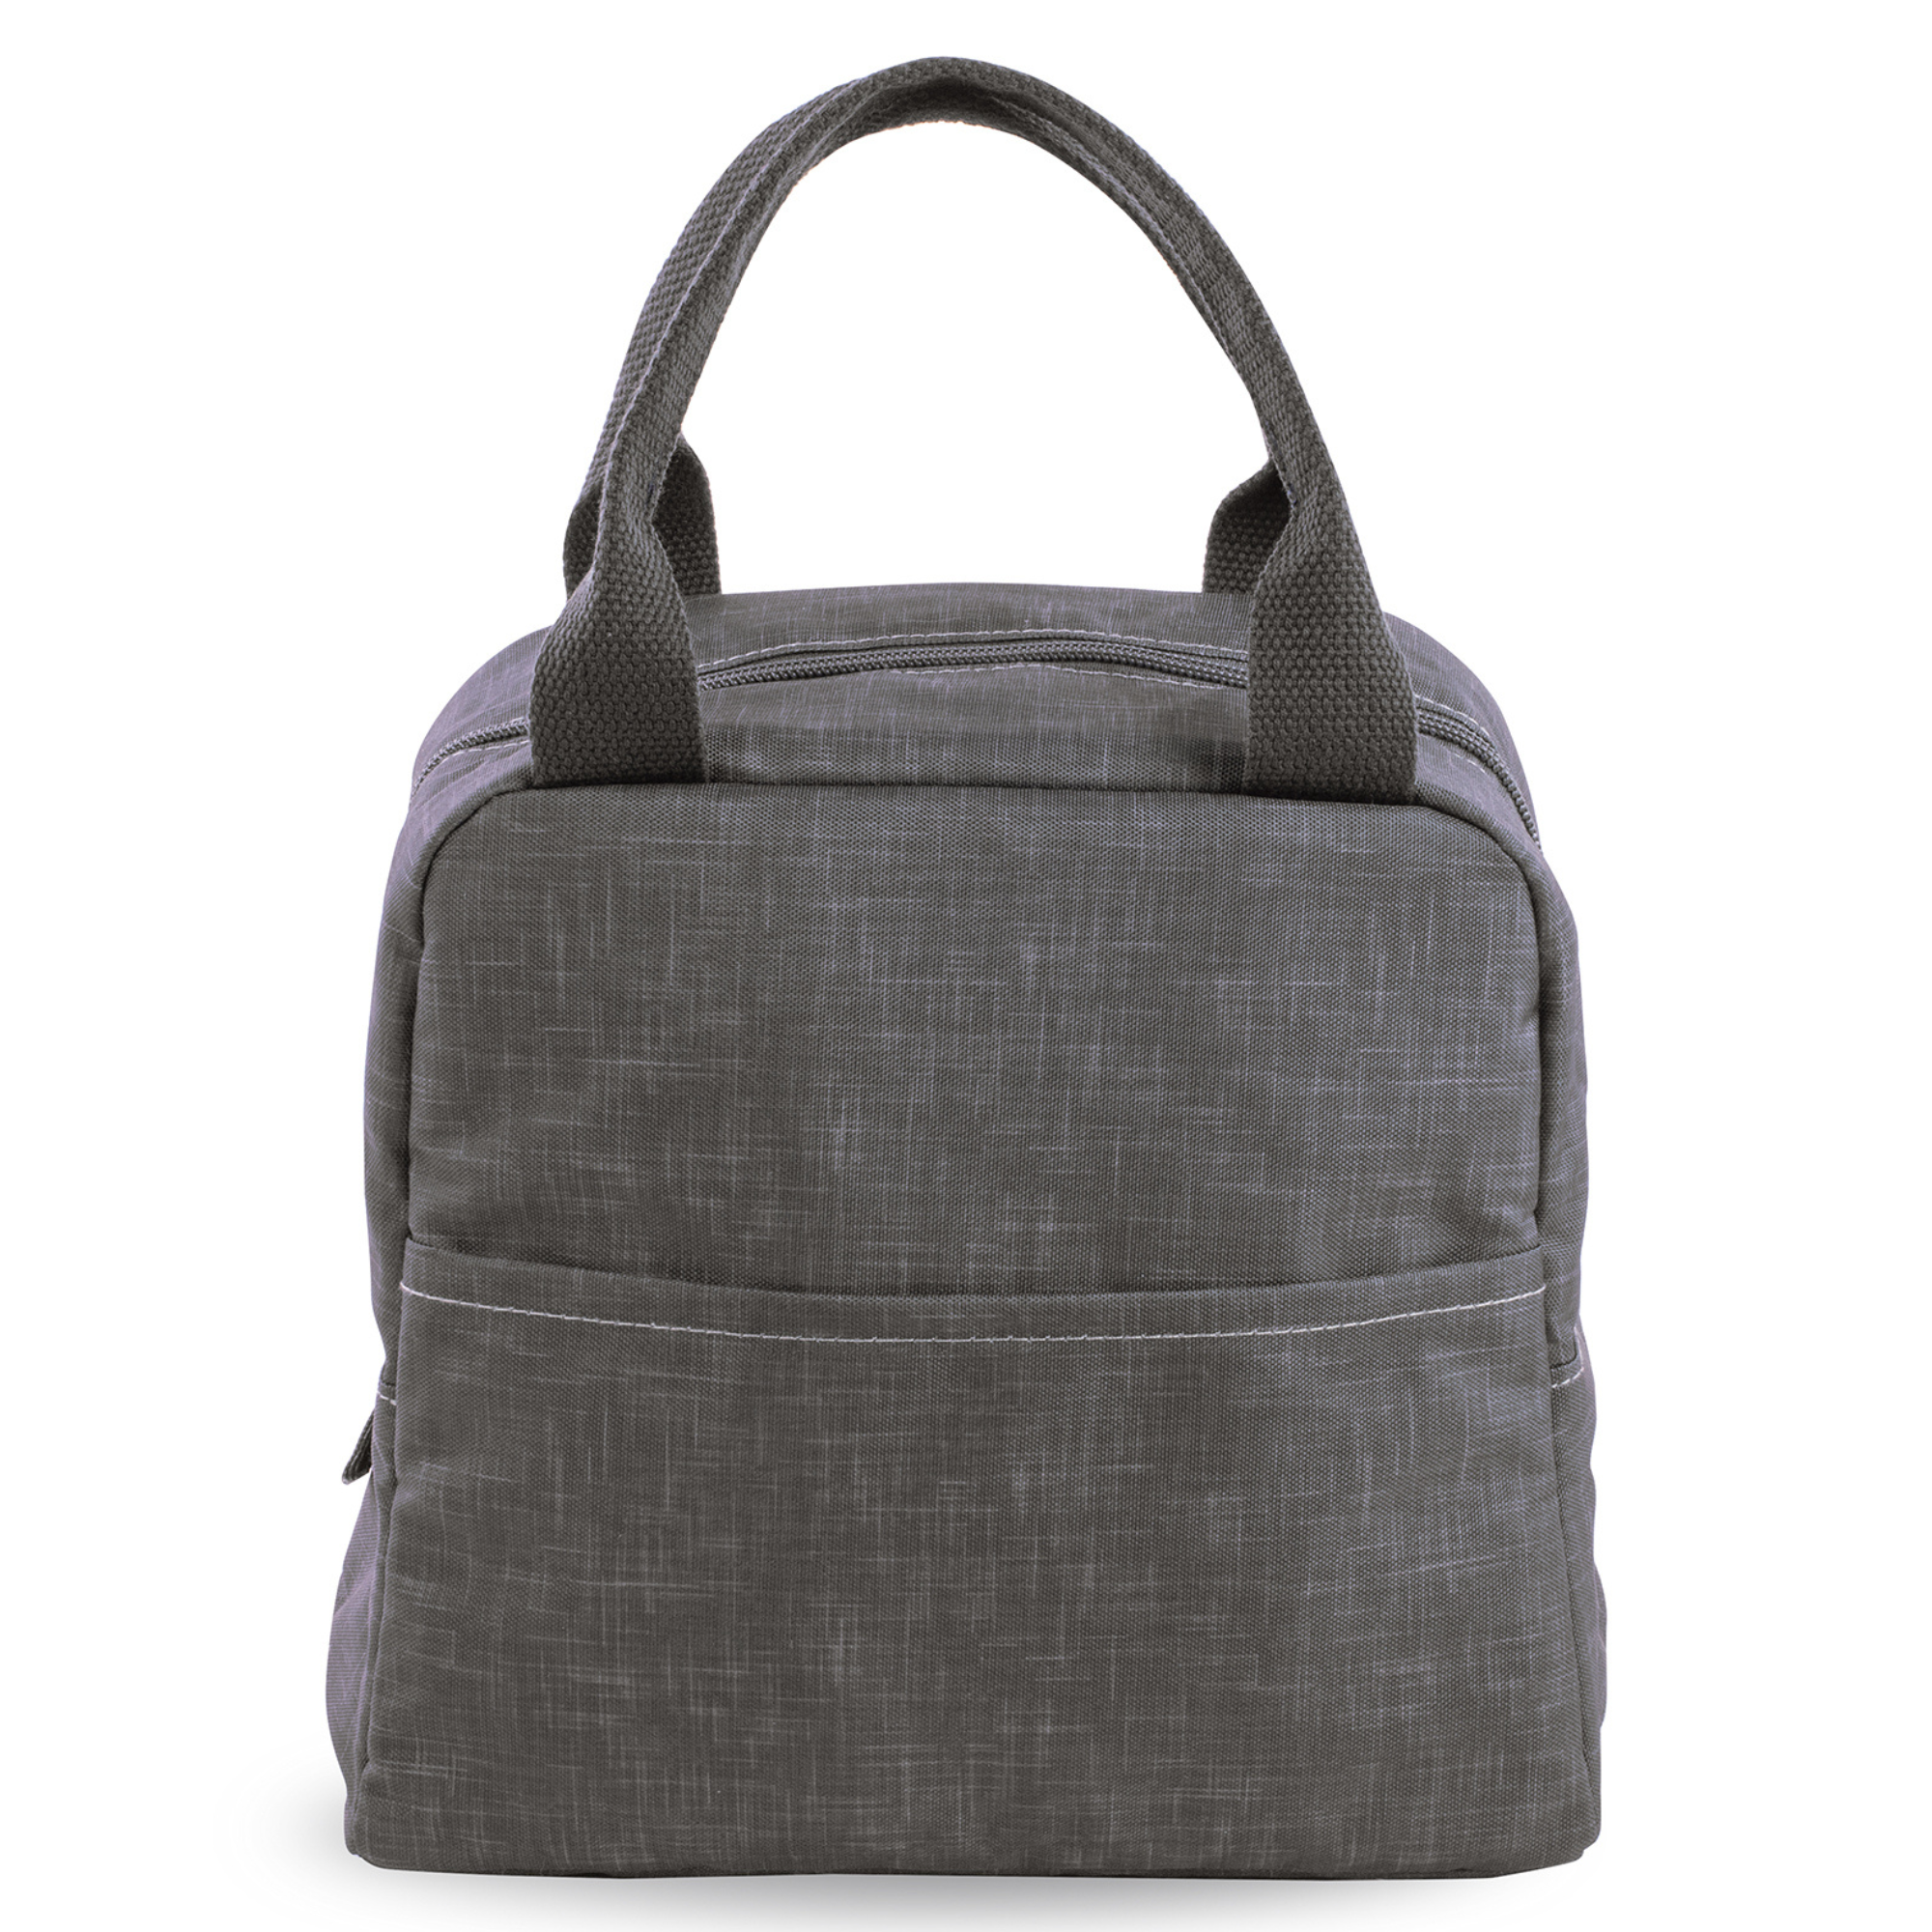 Small Lunch Tote, Grey